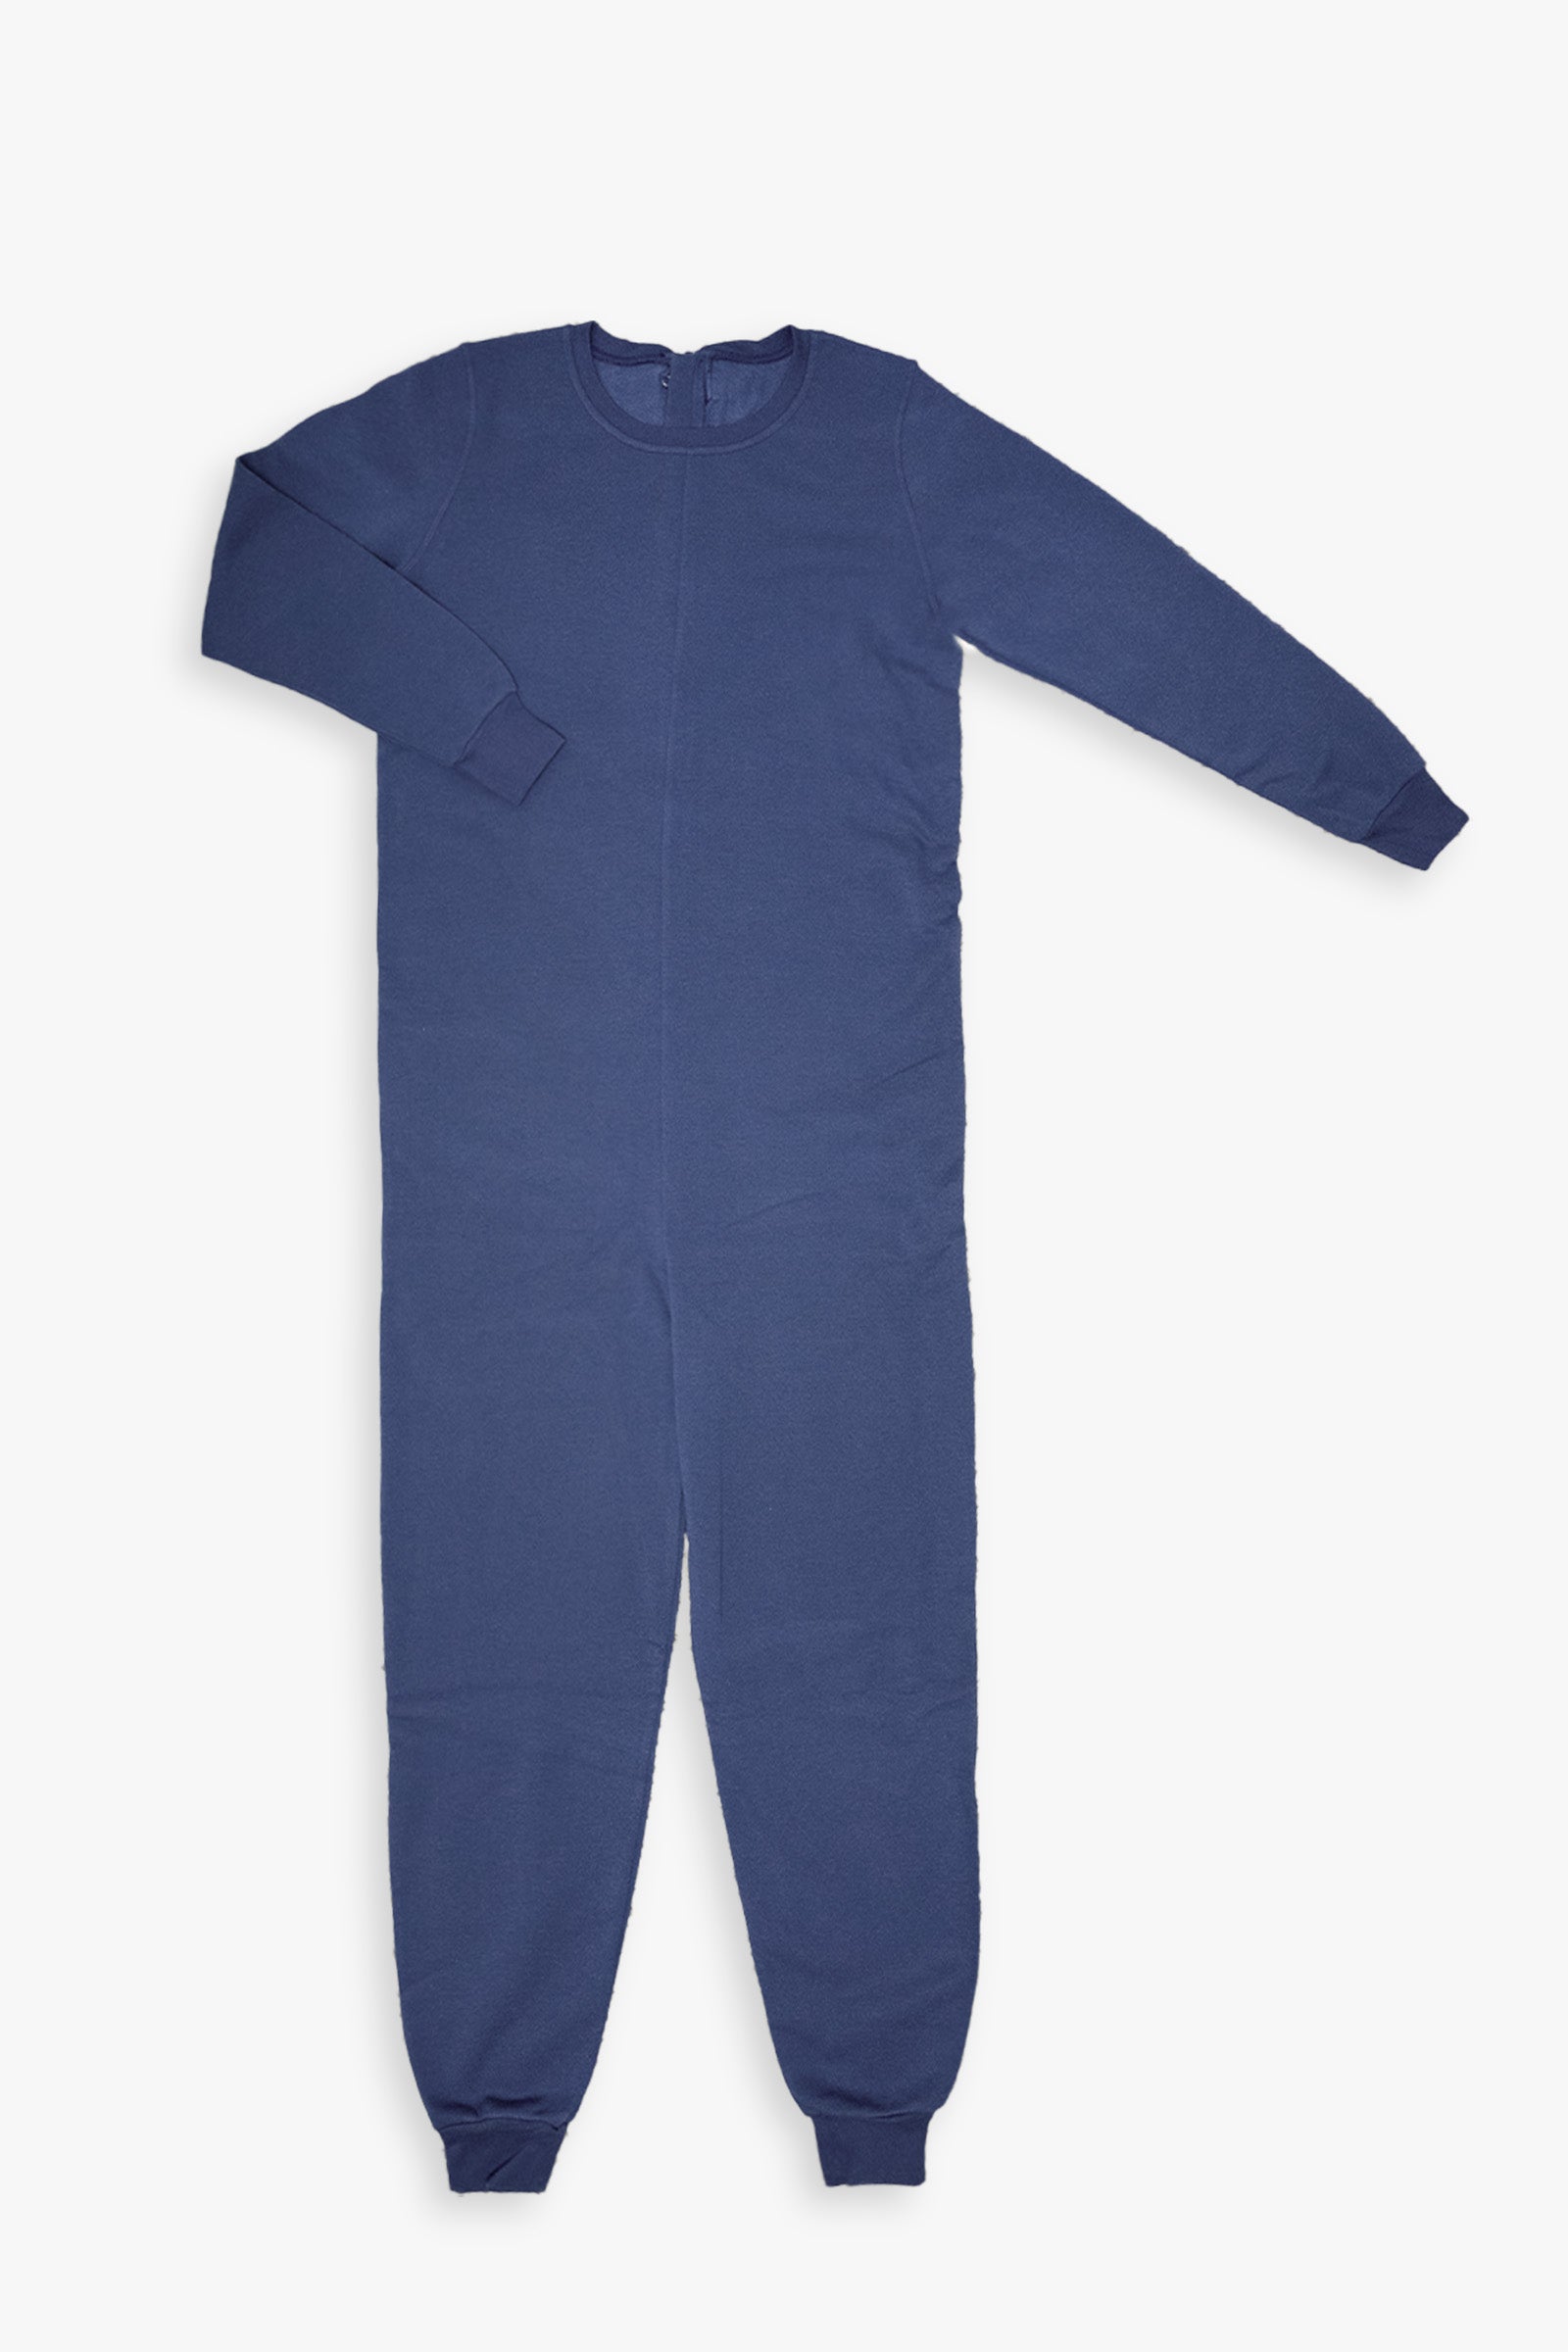 Adult Adaptive Back Zip Sleepwear | Clothing Designed for Special Needs and Disabilities